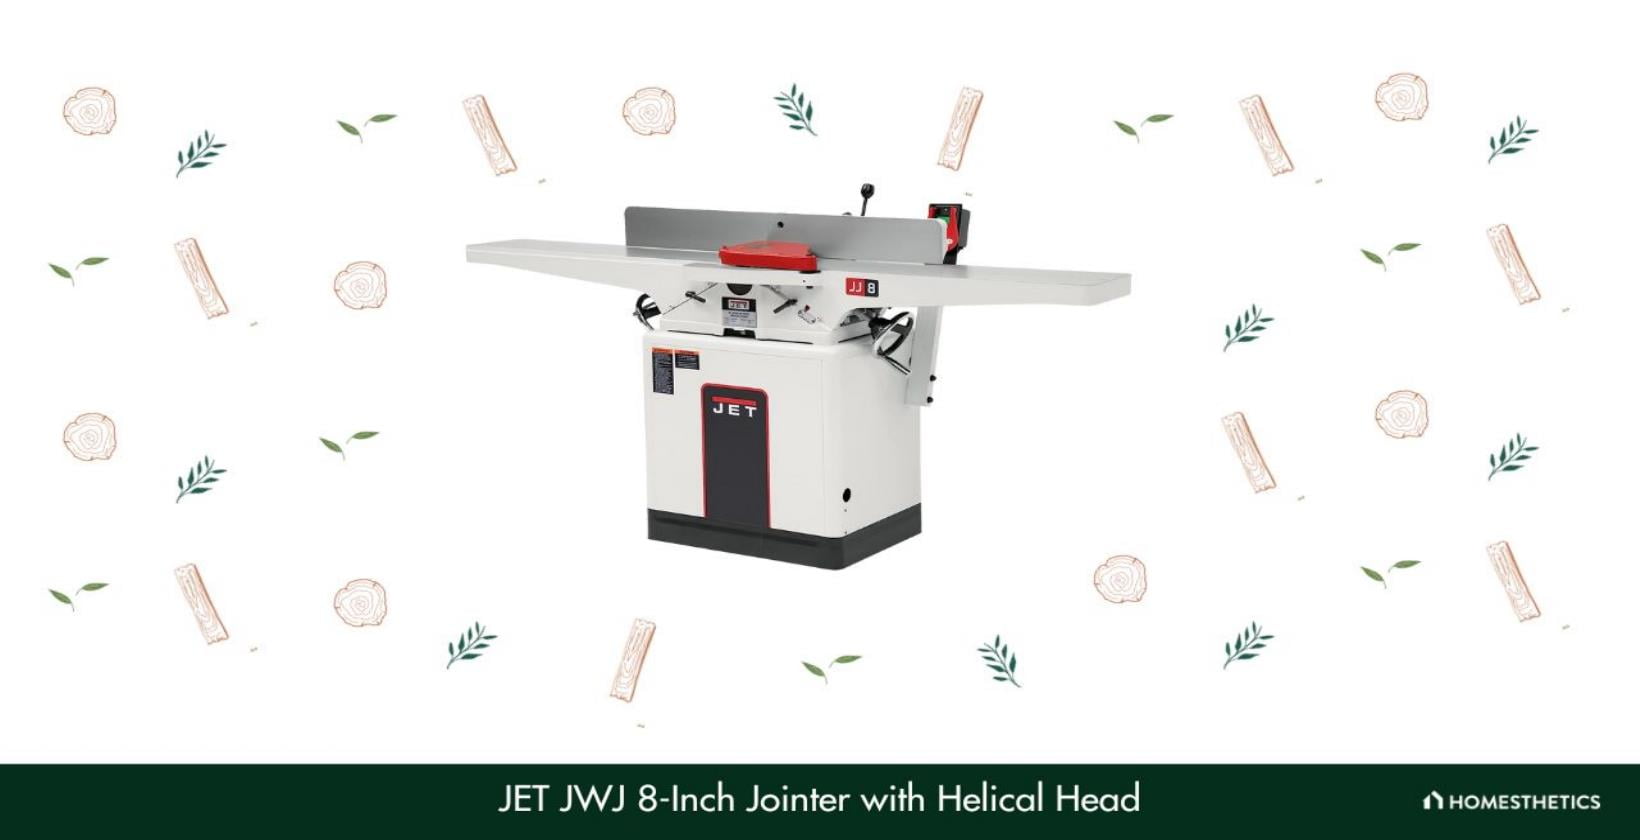 4. JET JWJ 8 Inch Jointer with Helical Head